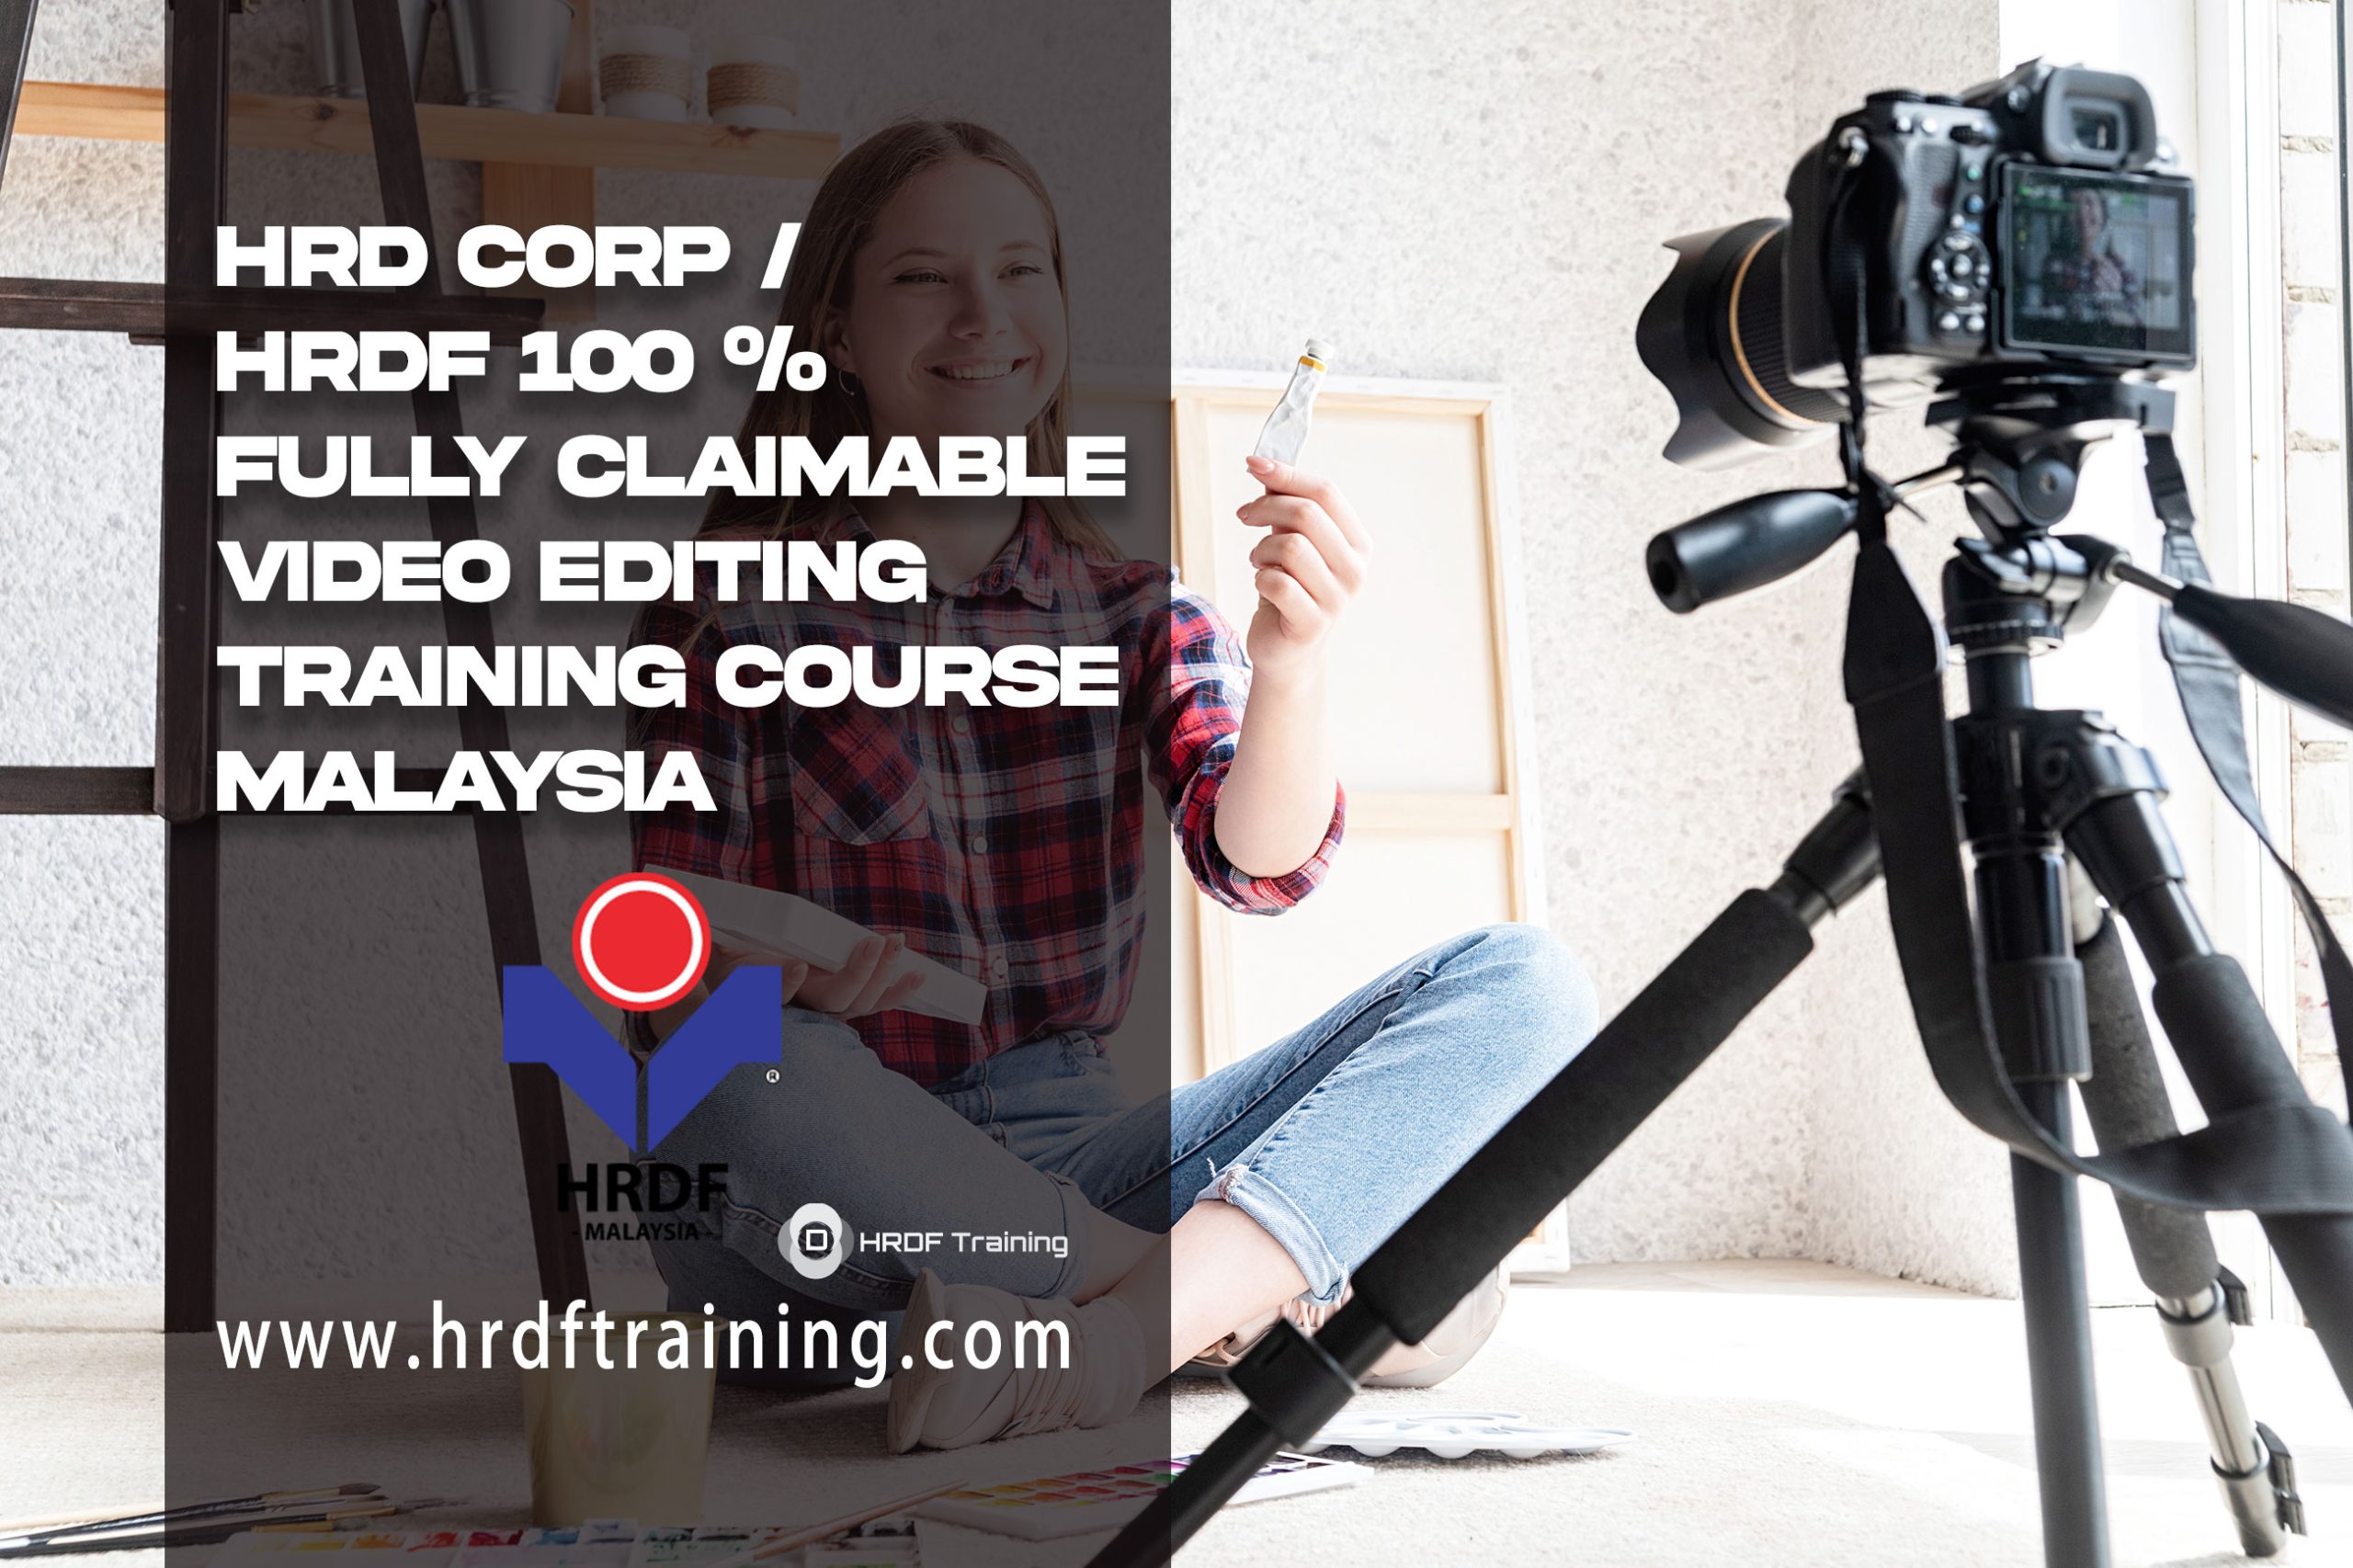 HRDF HRD Corp Claimable Video Editing Training Course Malaysia - January 2022